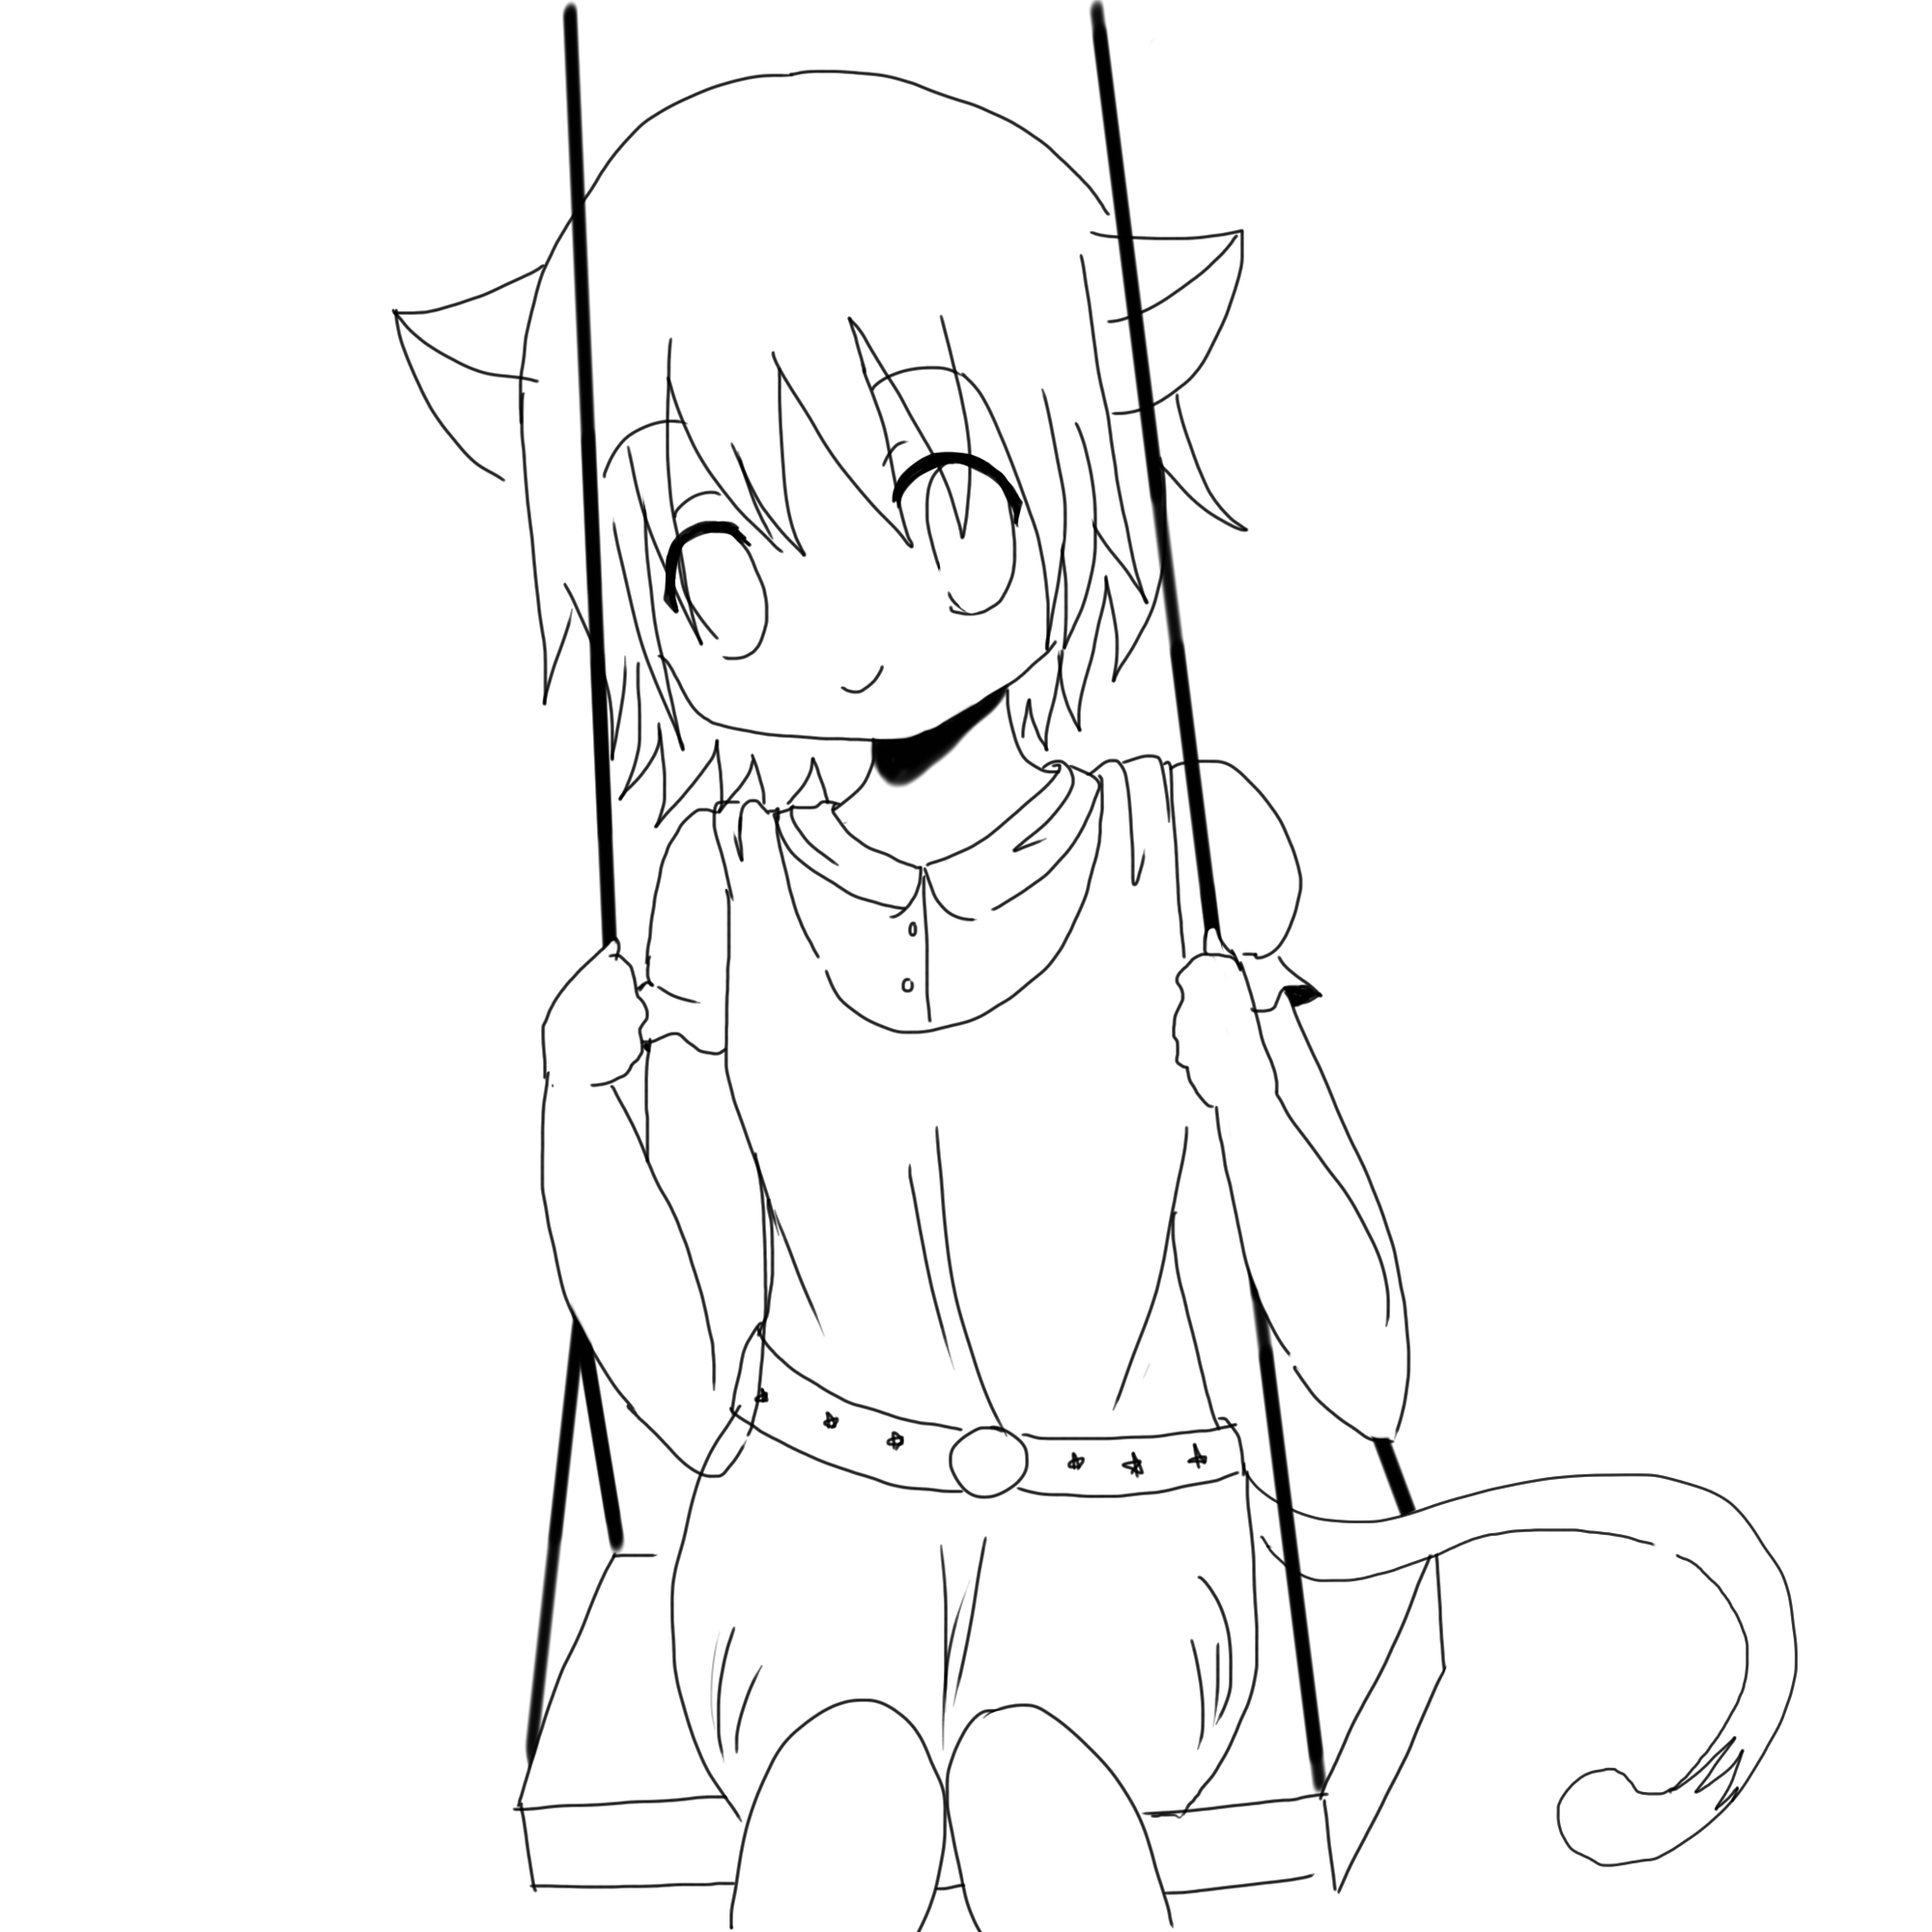 Cute Anime Cat Coloring Pages. Neko Girl Lineart By Watereye On ...